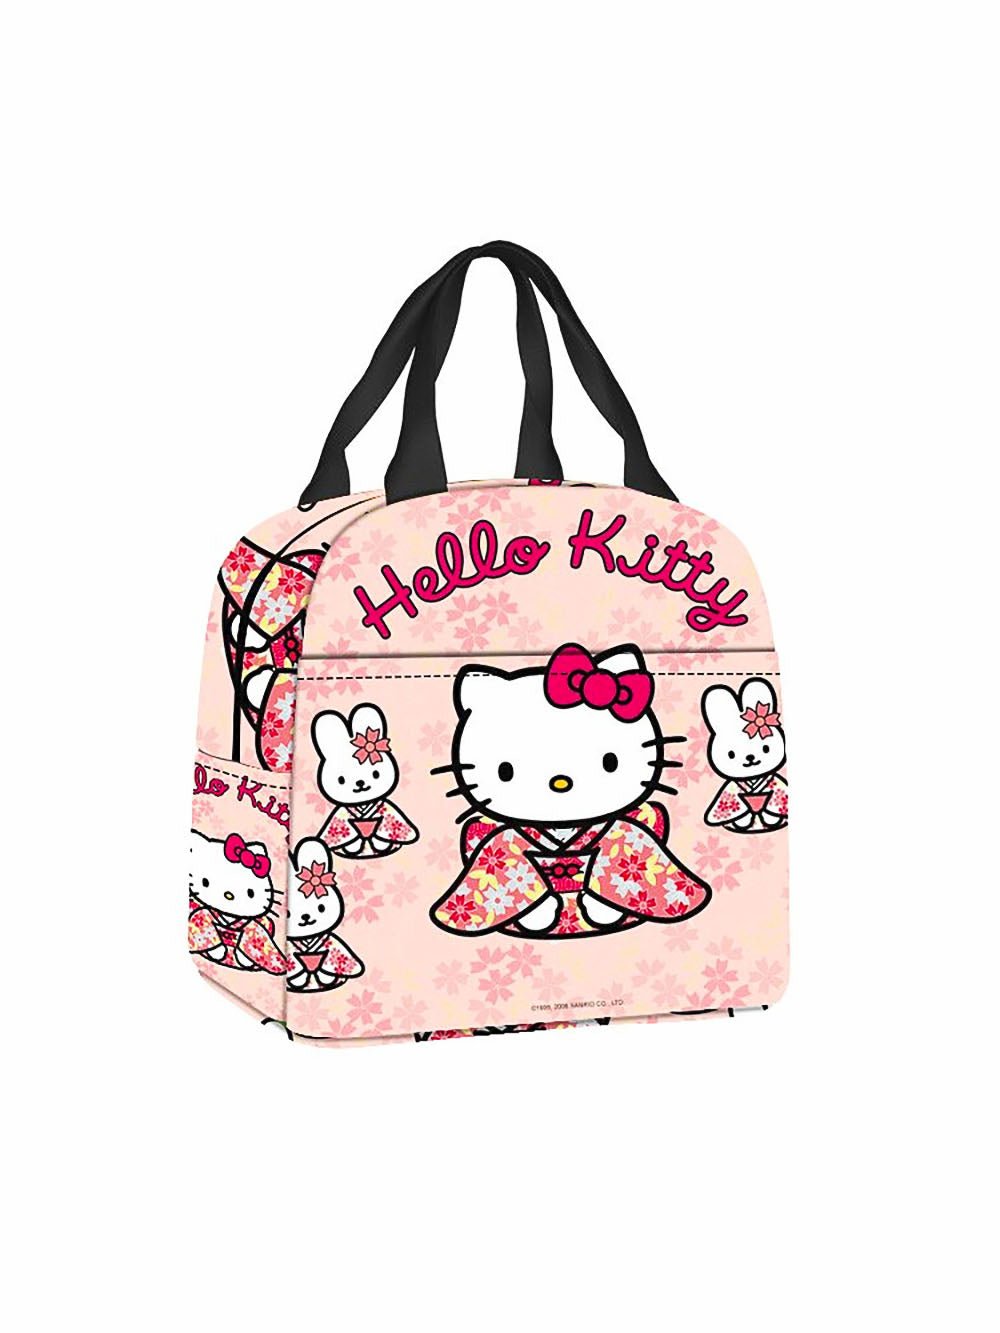 Hello Kitty Melody Lunch Bag Thicken Cooler Bento Box Portable Zipper  Thermal Bag Travel Picnic Storage